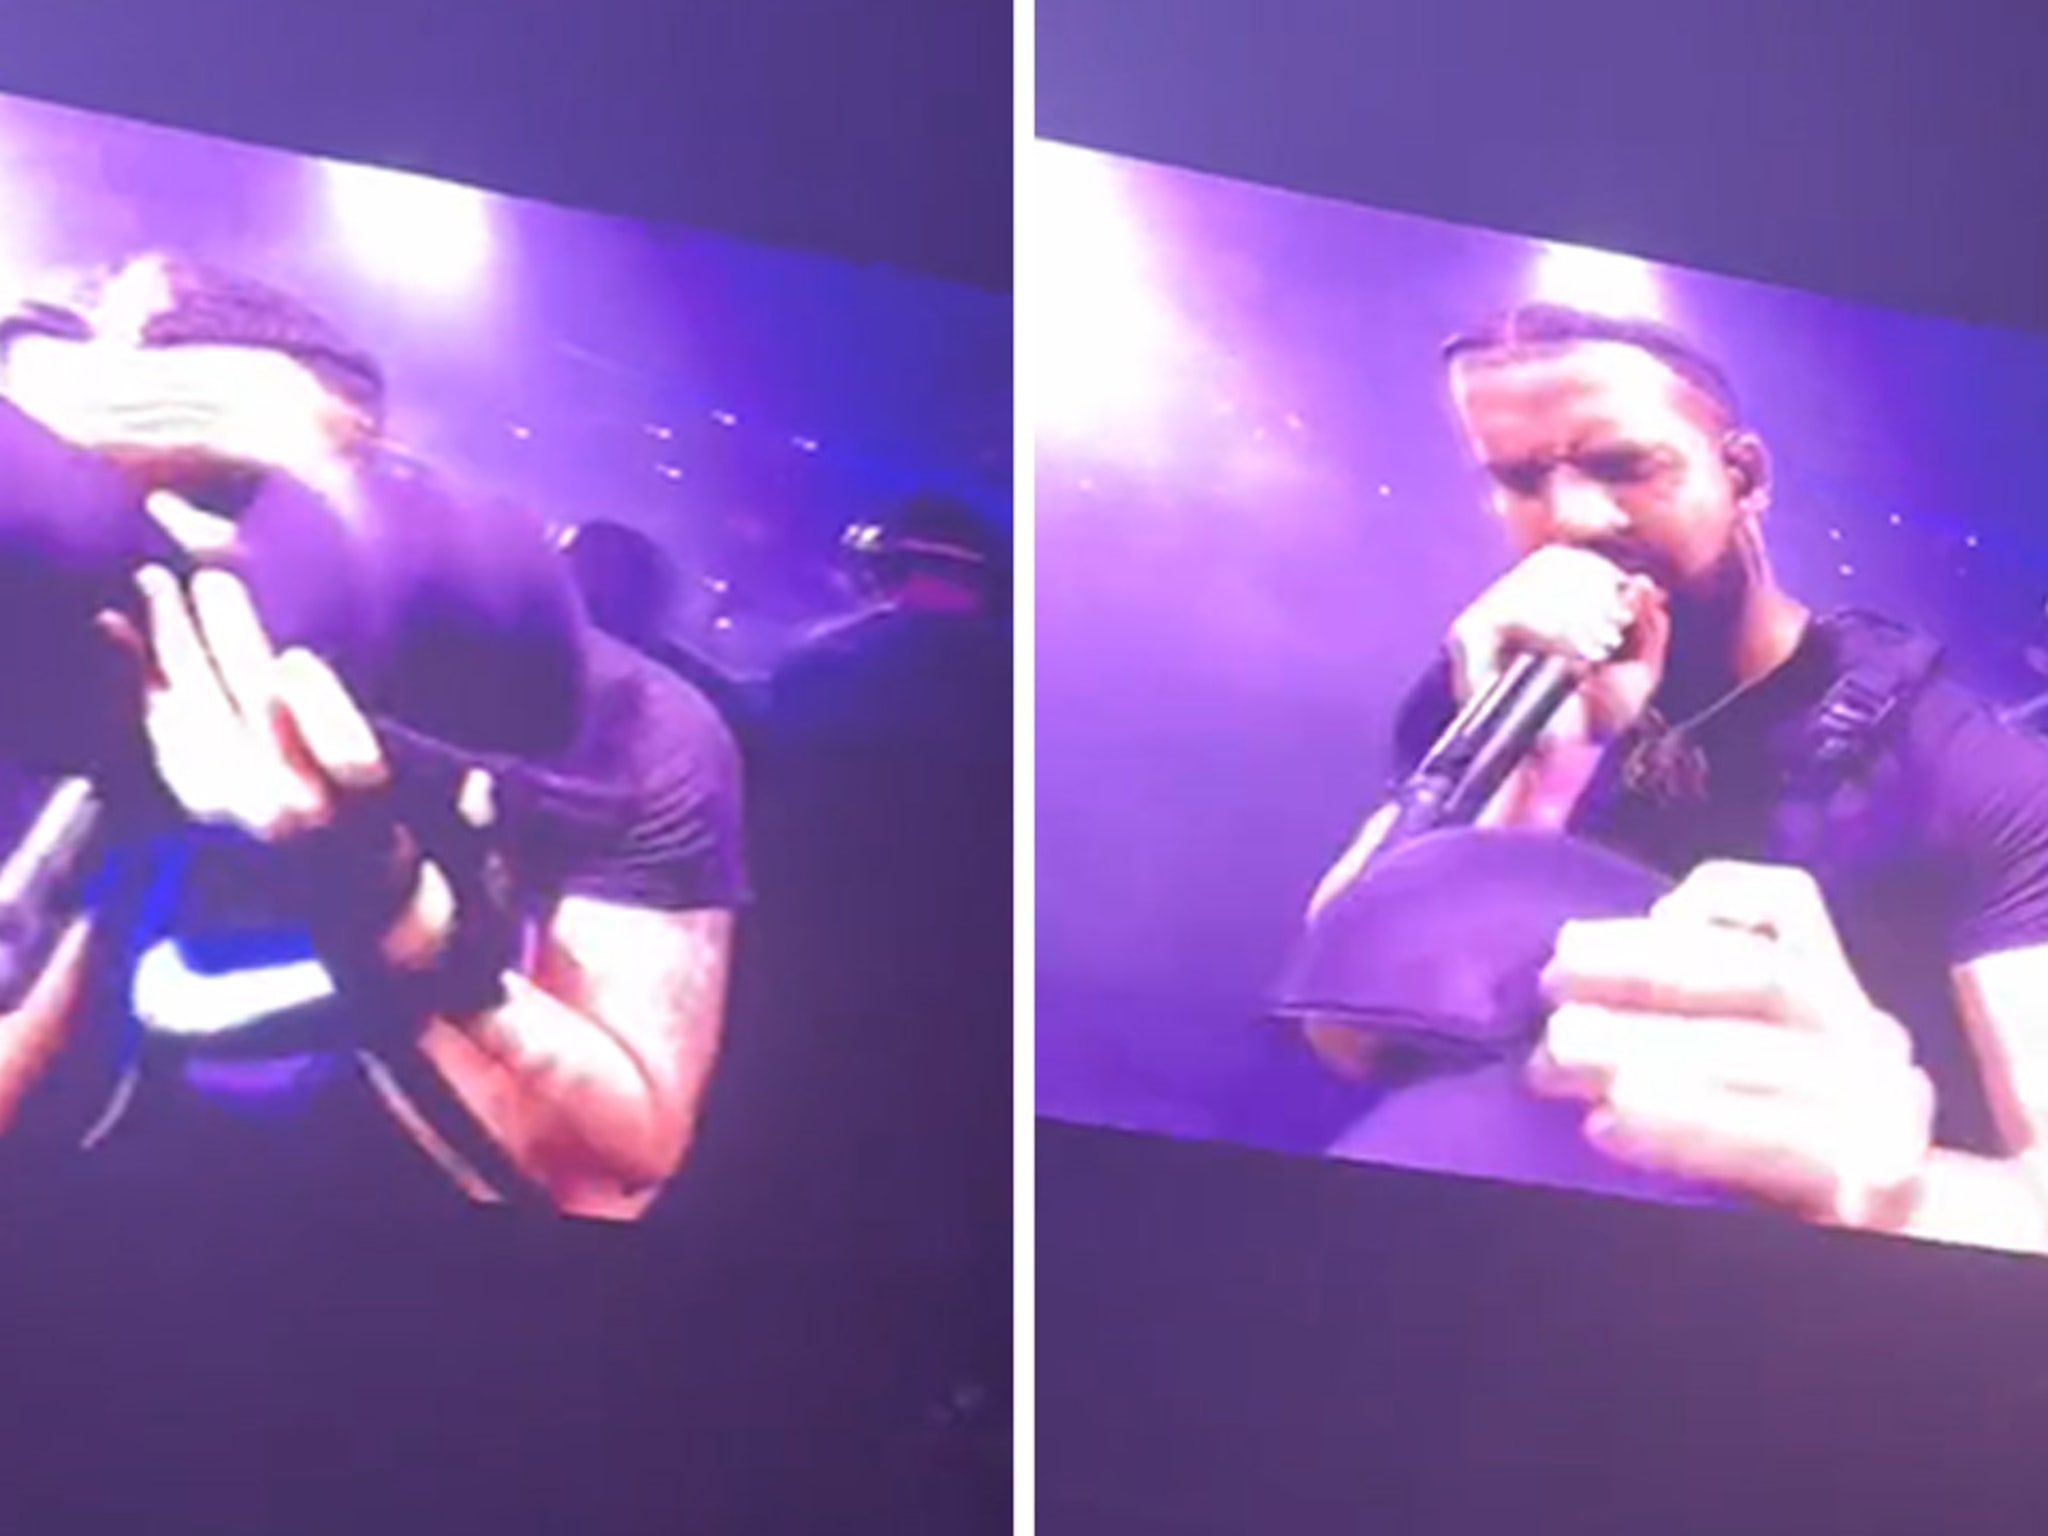 Drake had the biggest bra in the world on stage last night 😂😭 (Swipe) 🎥:  Dm for credit